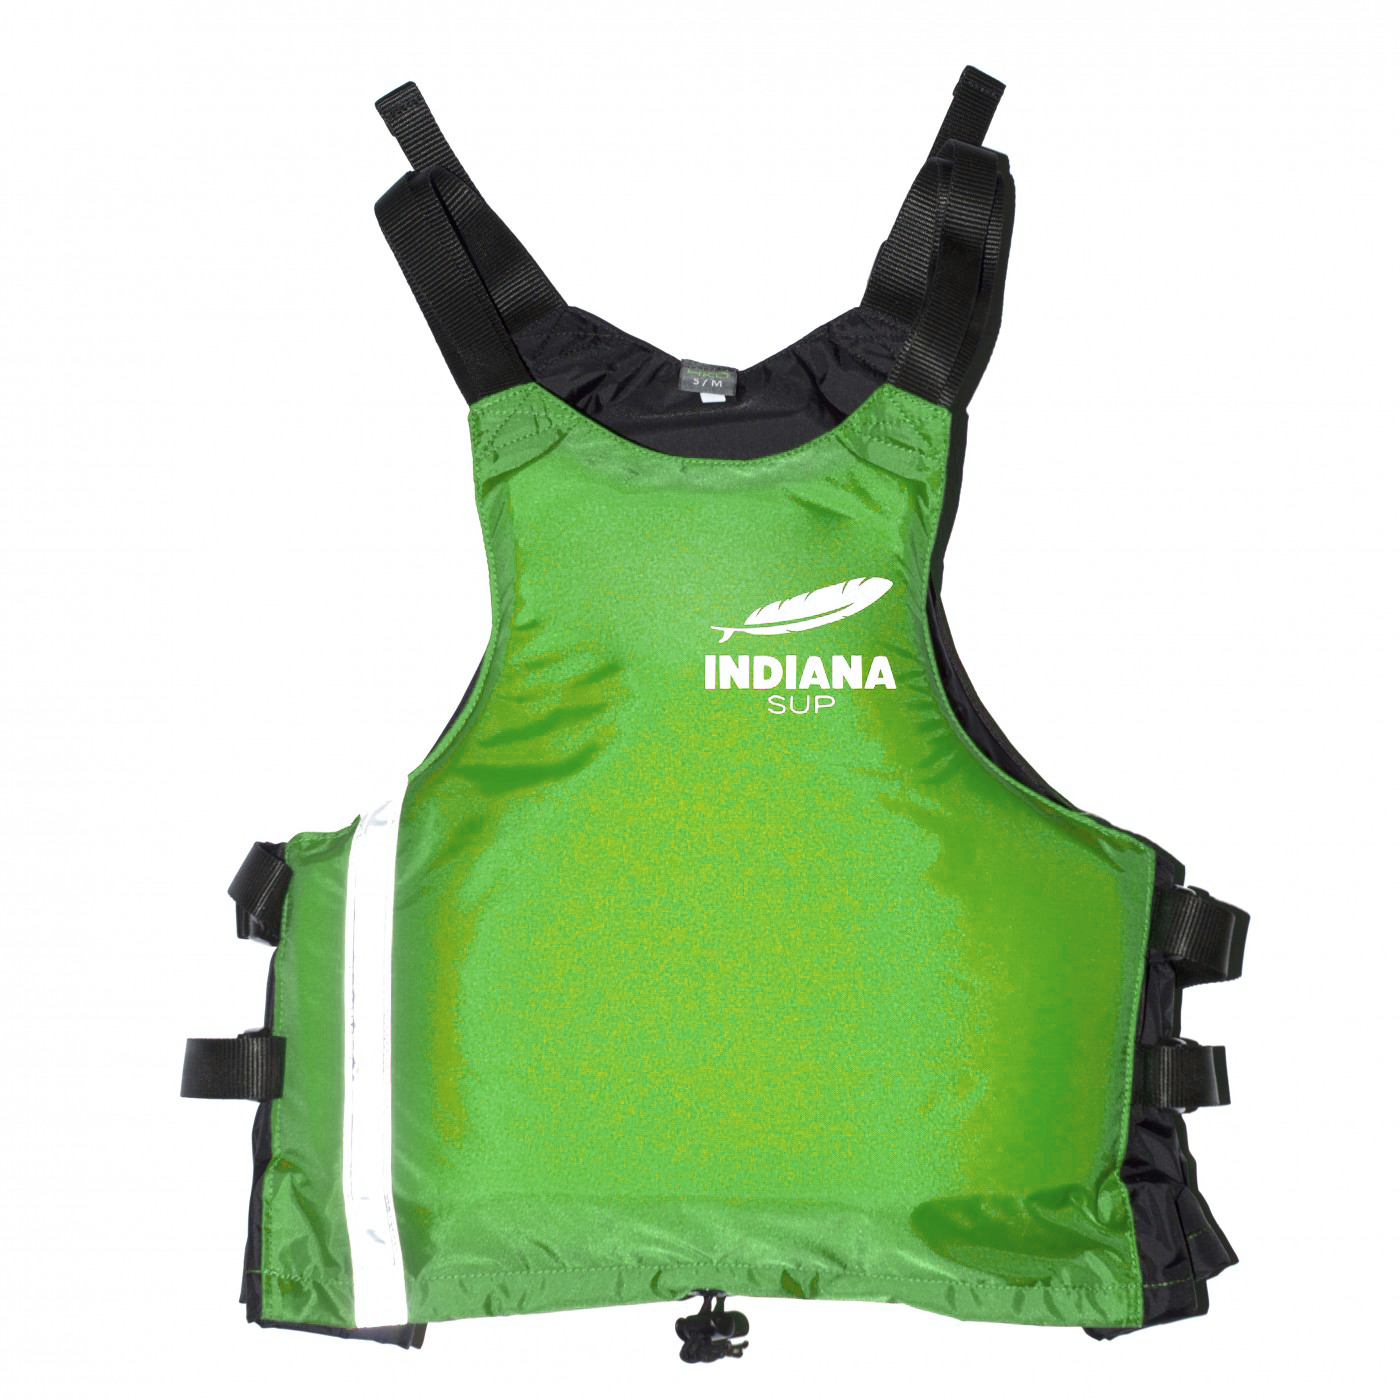 Indiana Swift Vest L/XL (ISO Norm 12402-5) green